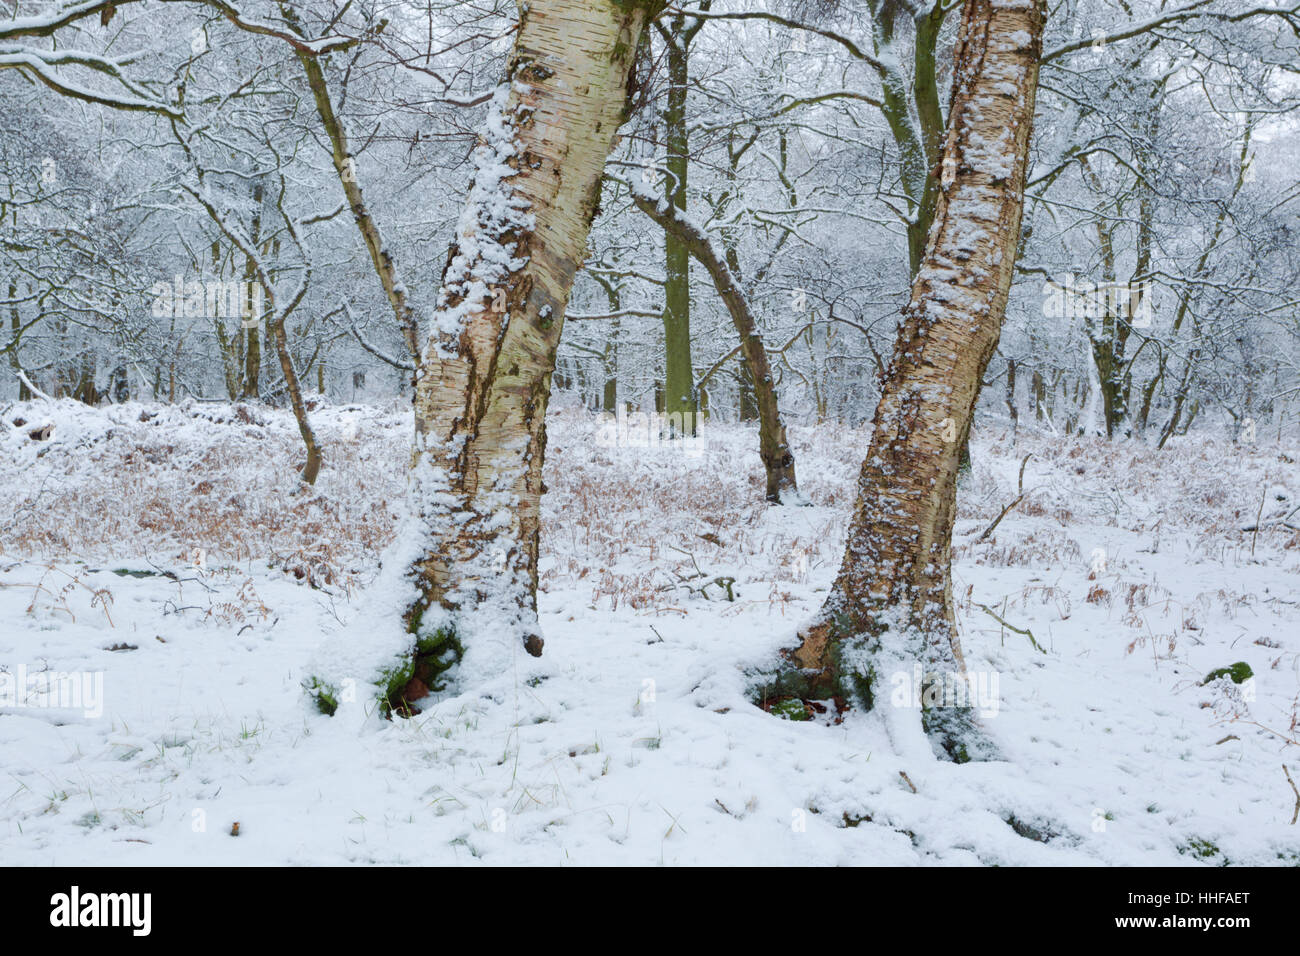 Downy Birch trees, Latin name Betula pubescens, with a light covering of snow in the North York Moors national park Stock Photo